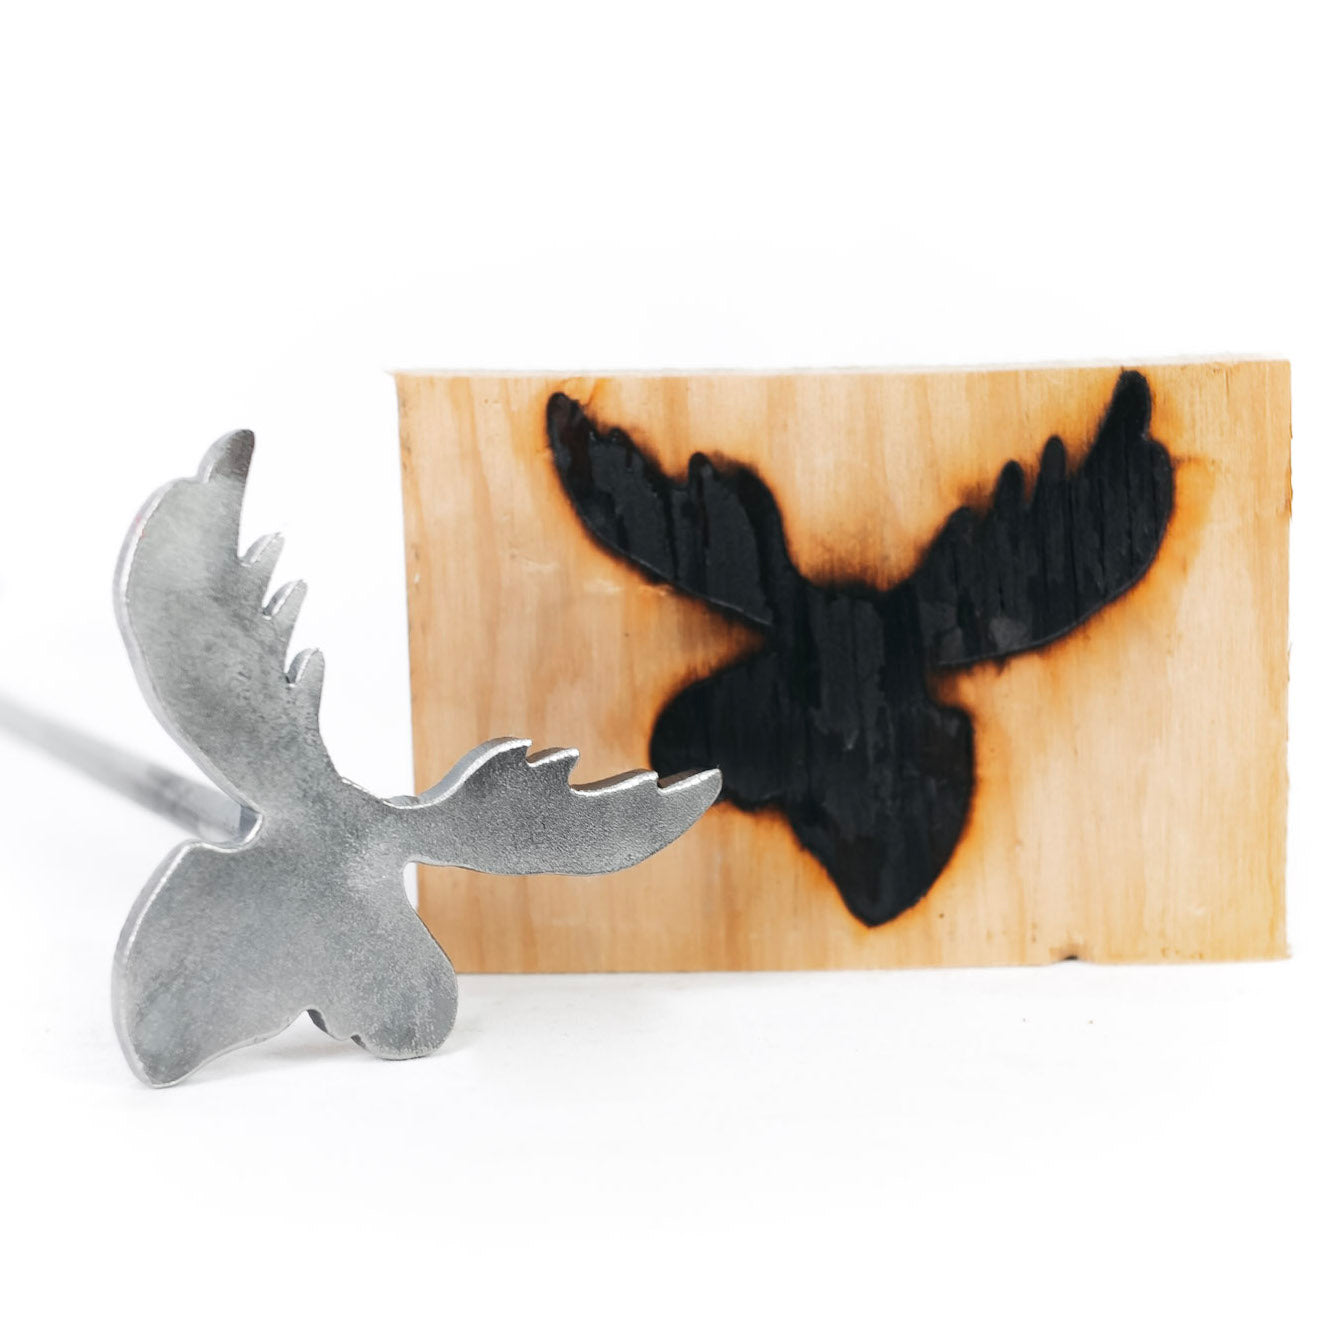 Moose Head Brand - 4" - BBQ, Crafts, Woodworking Projects - The Heritage Forge